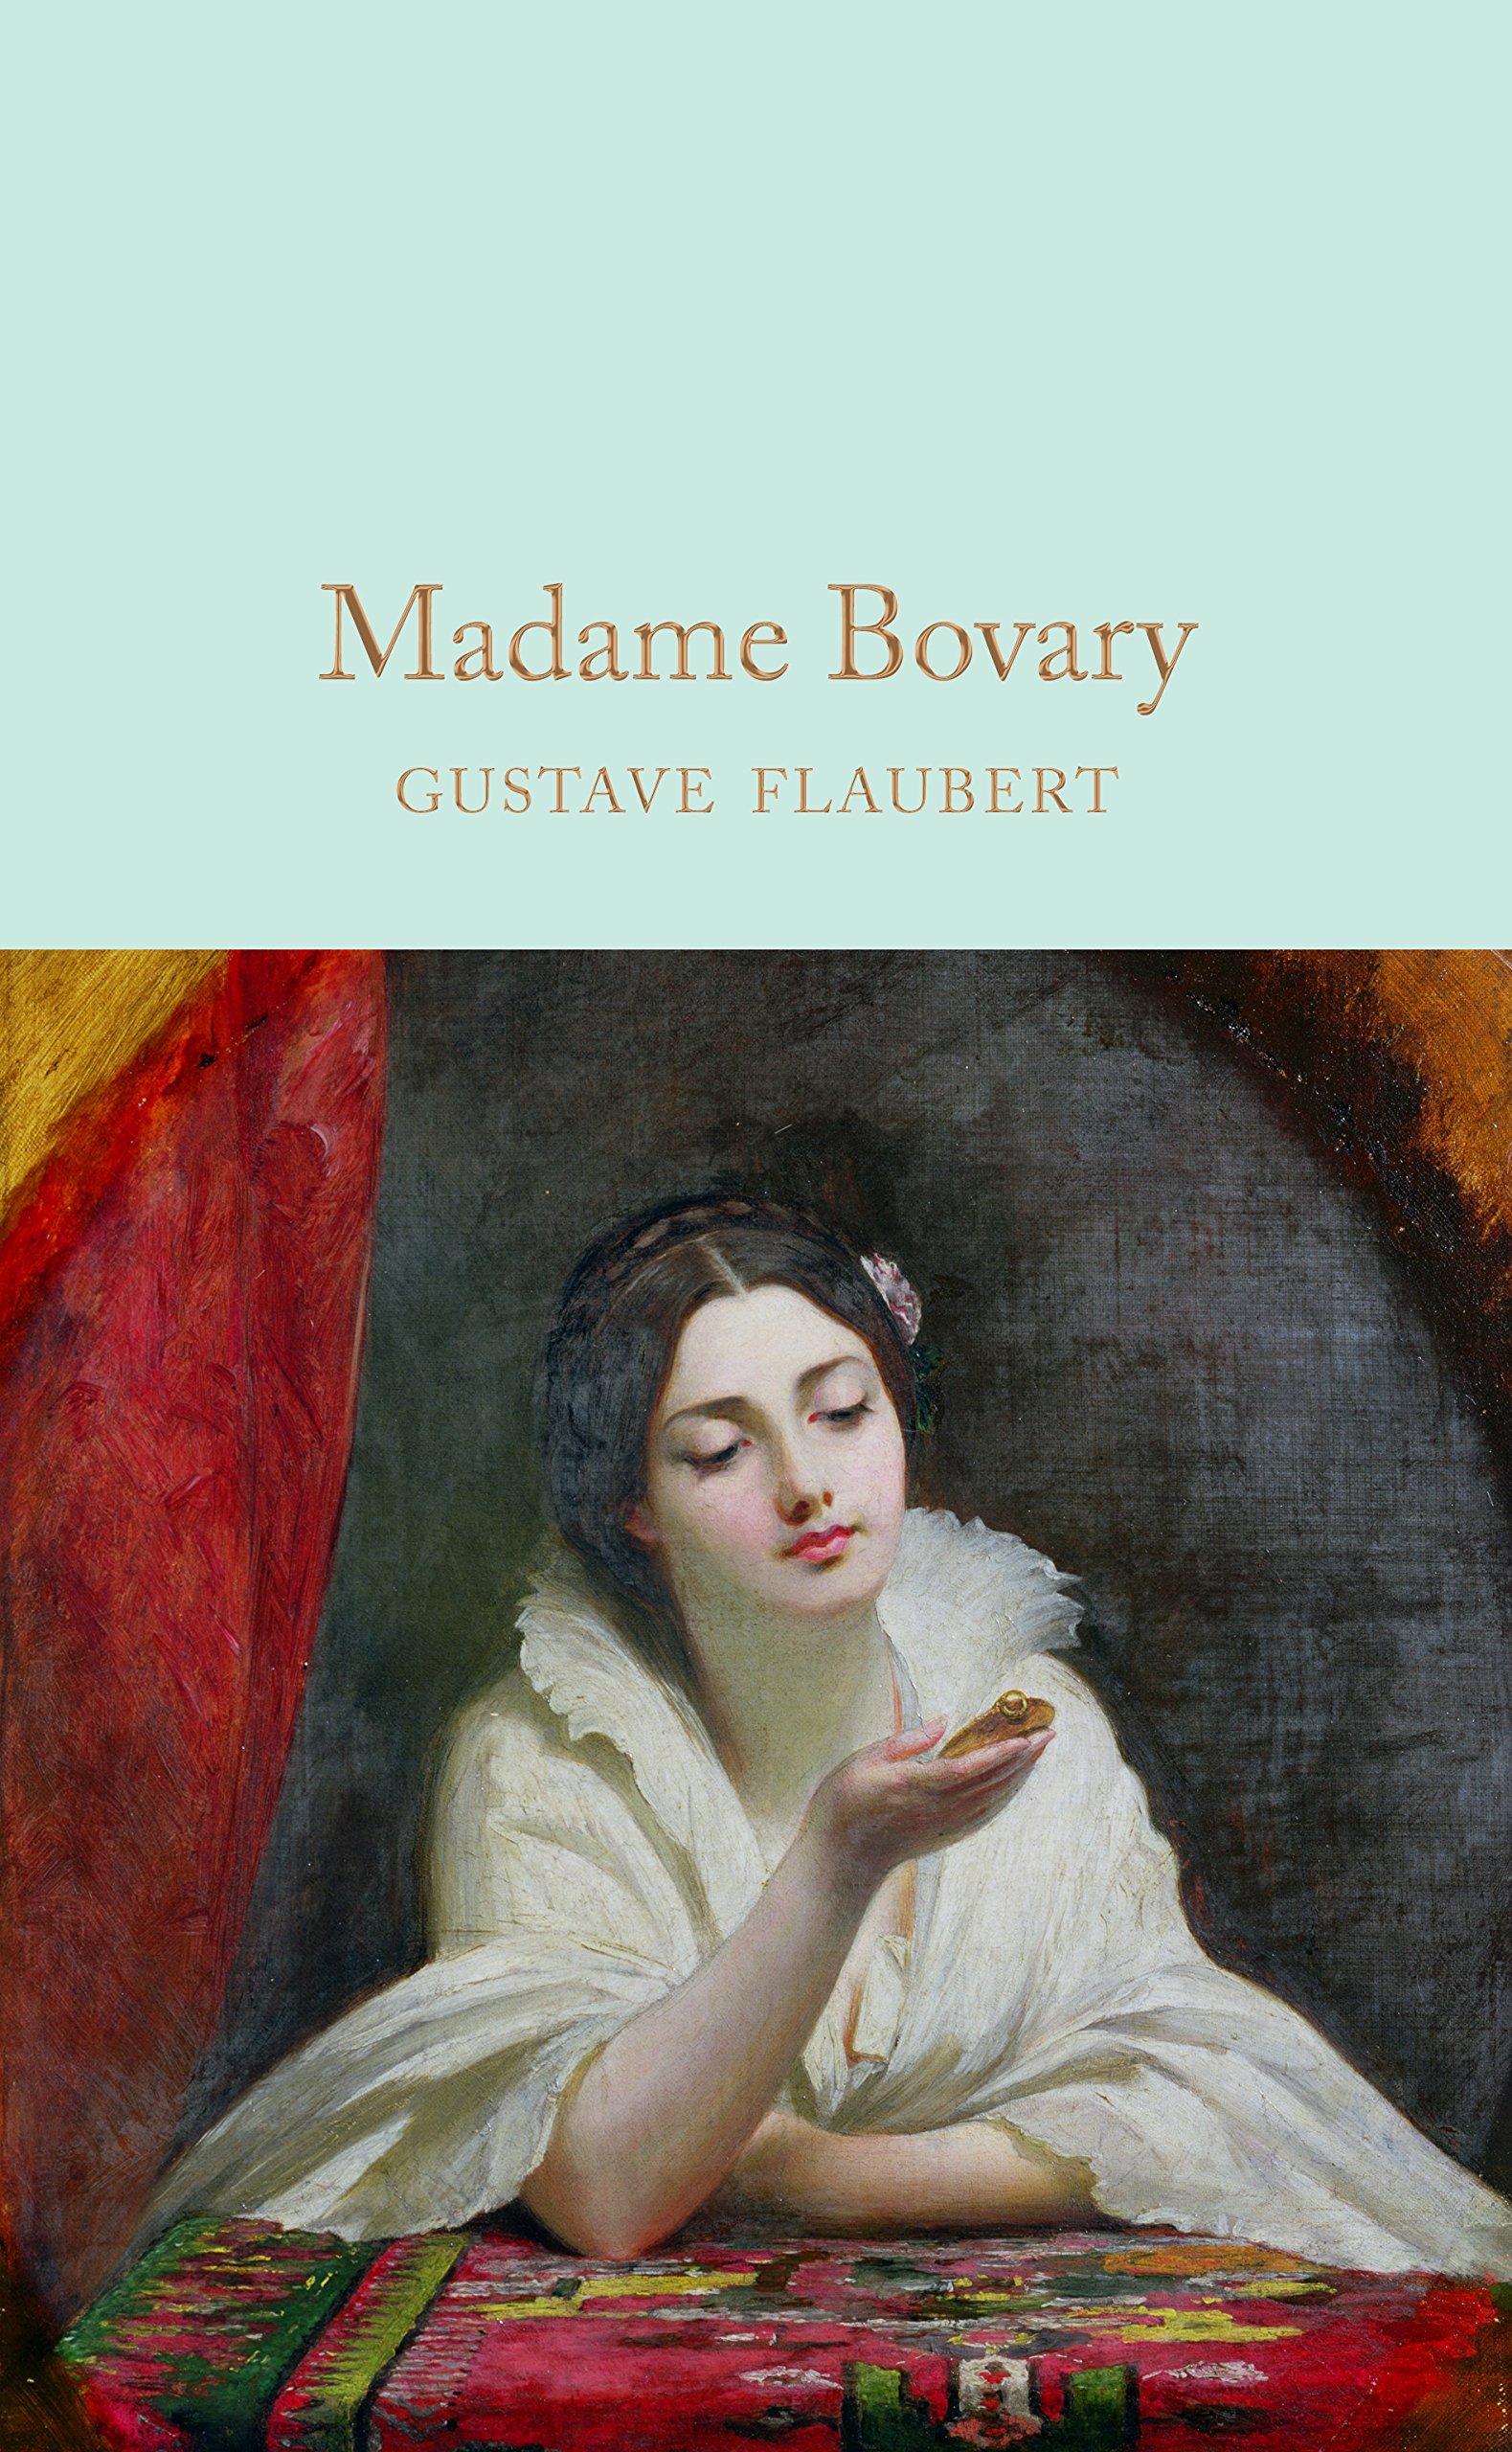 Madame Bovary download the new for ios